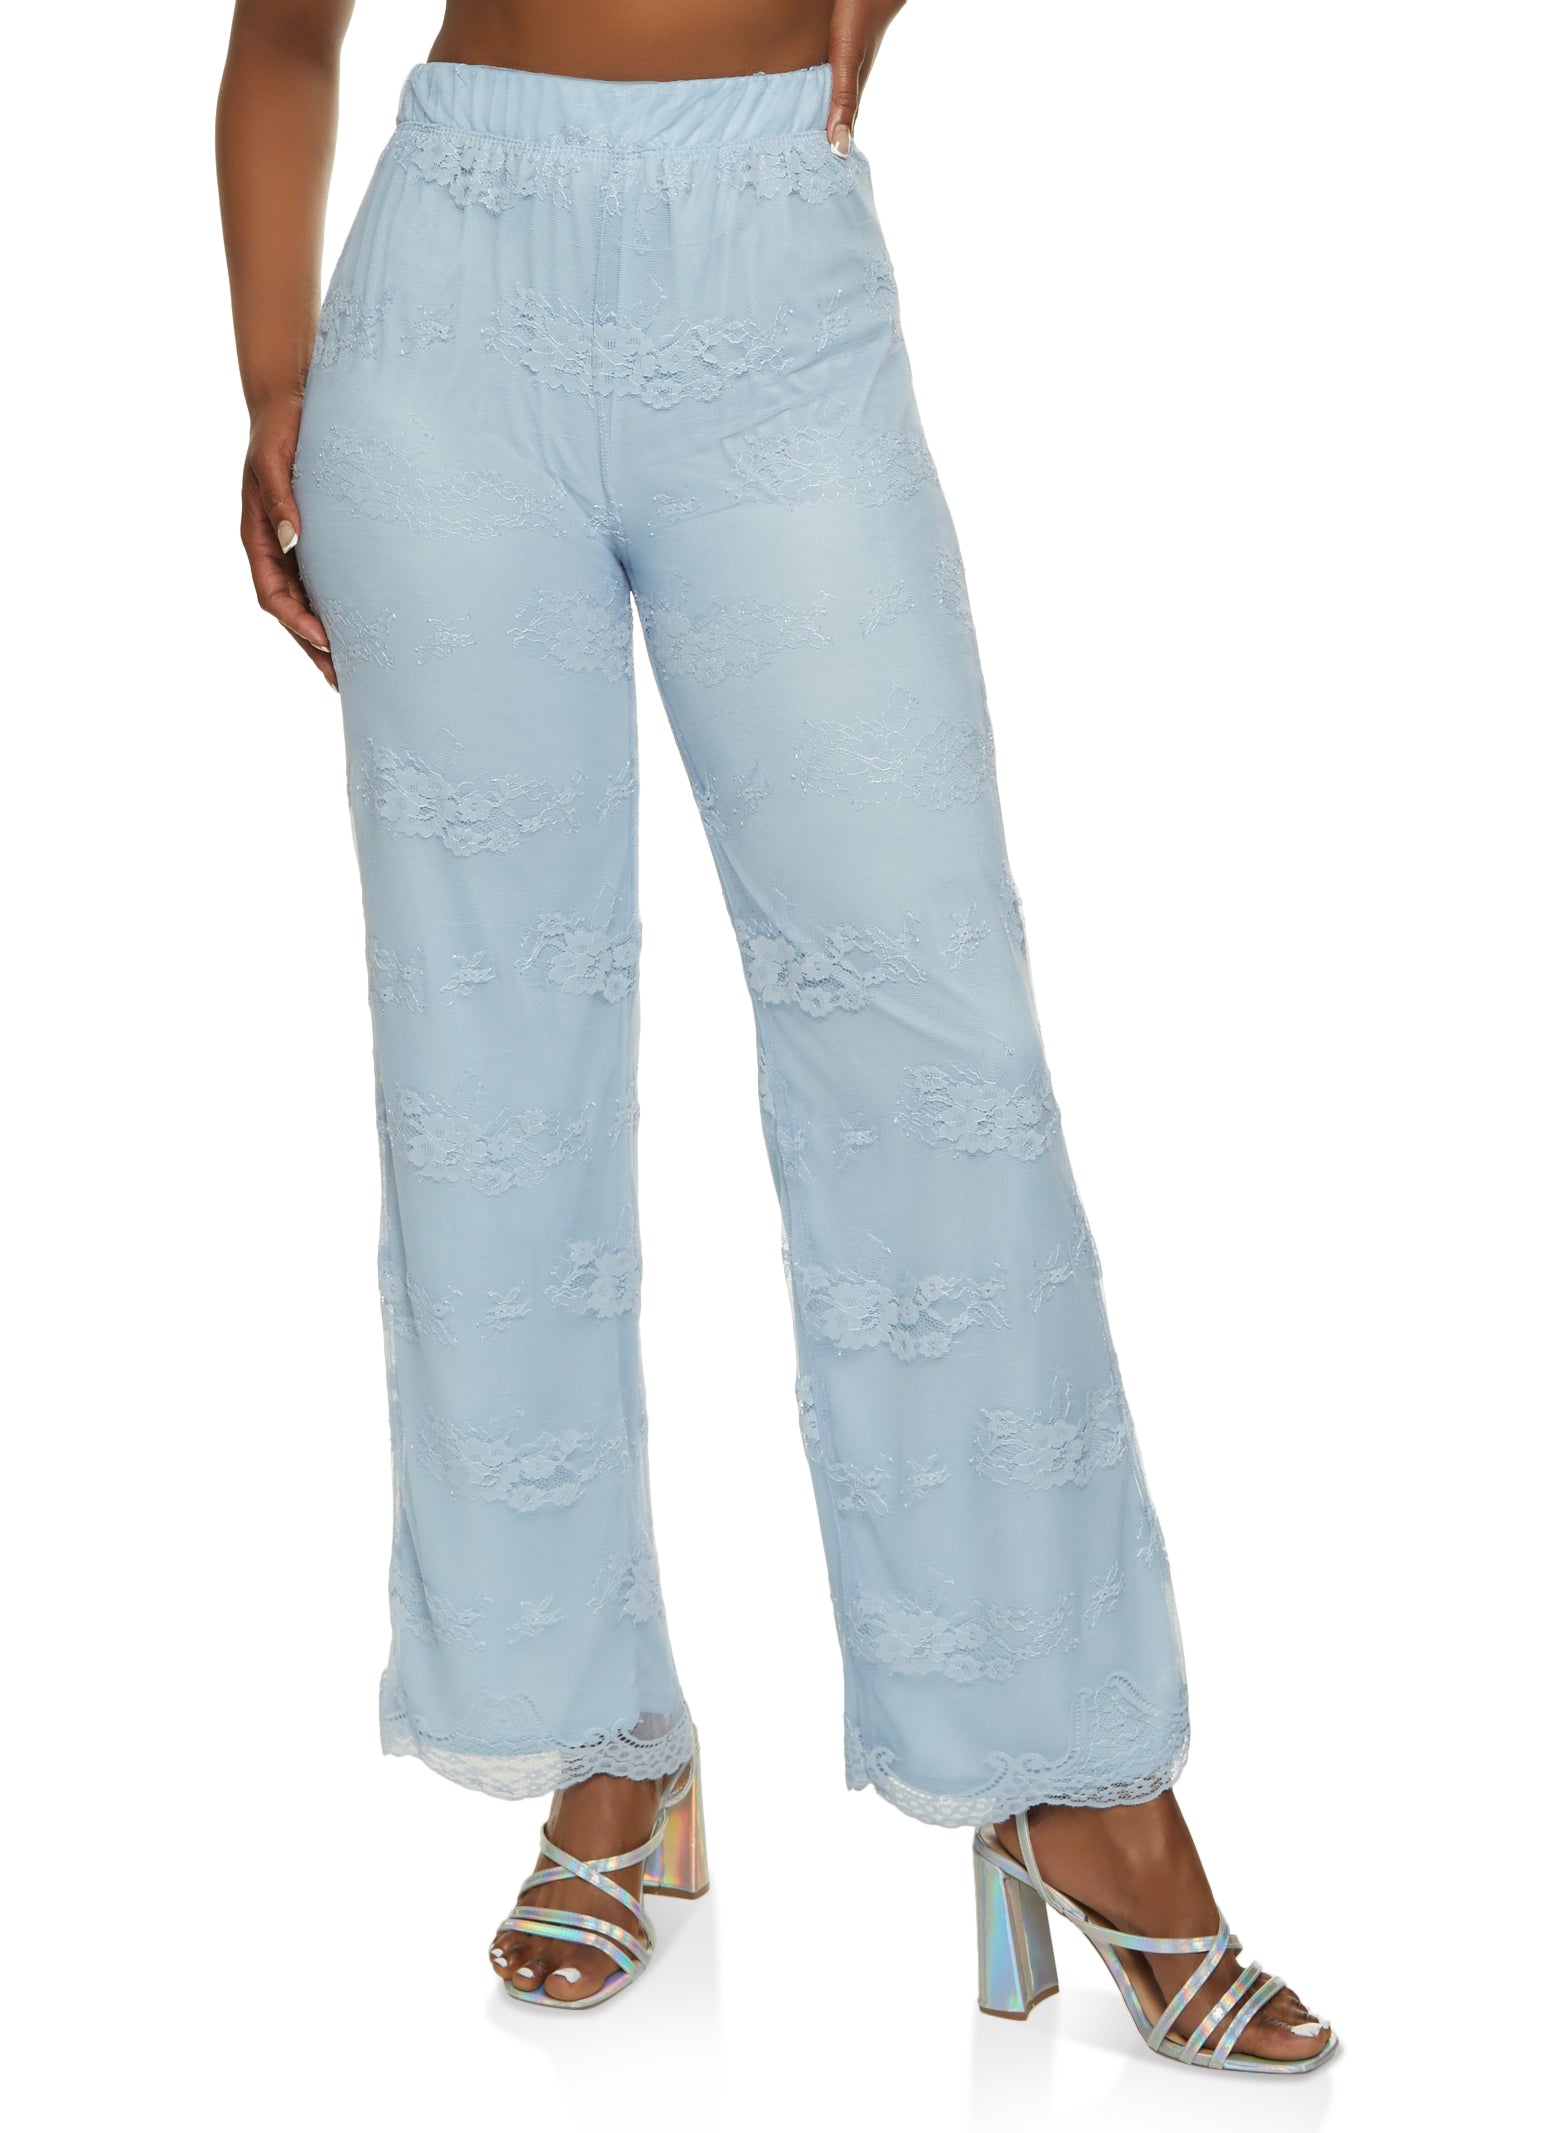 Mesh Floral Lace Flared Pants - Baby Blue